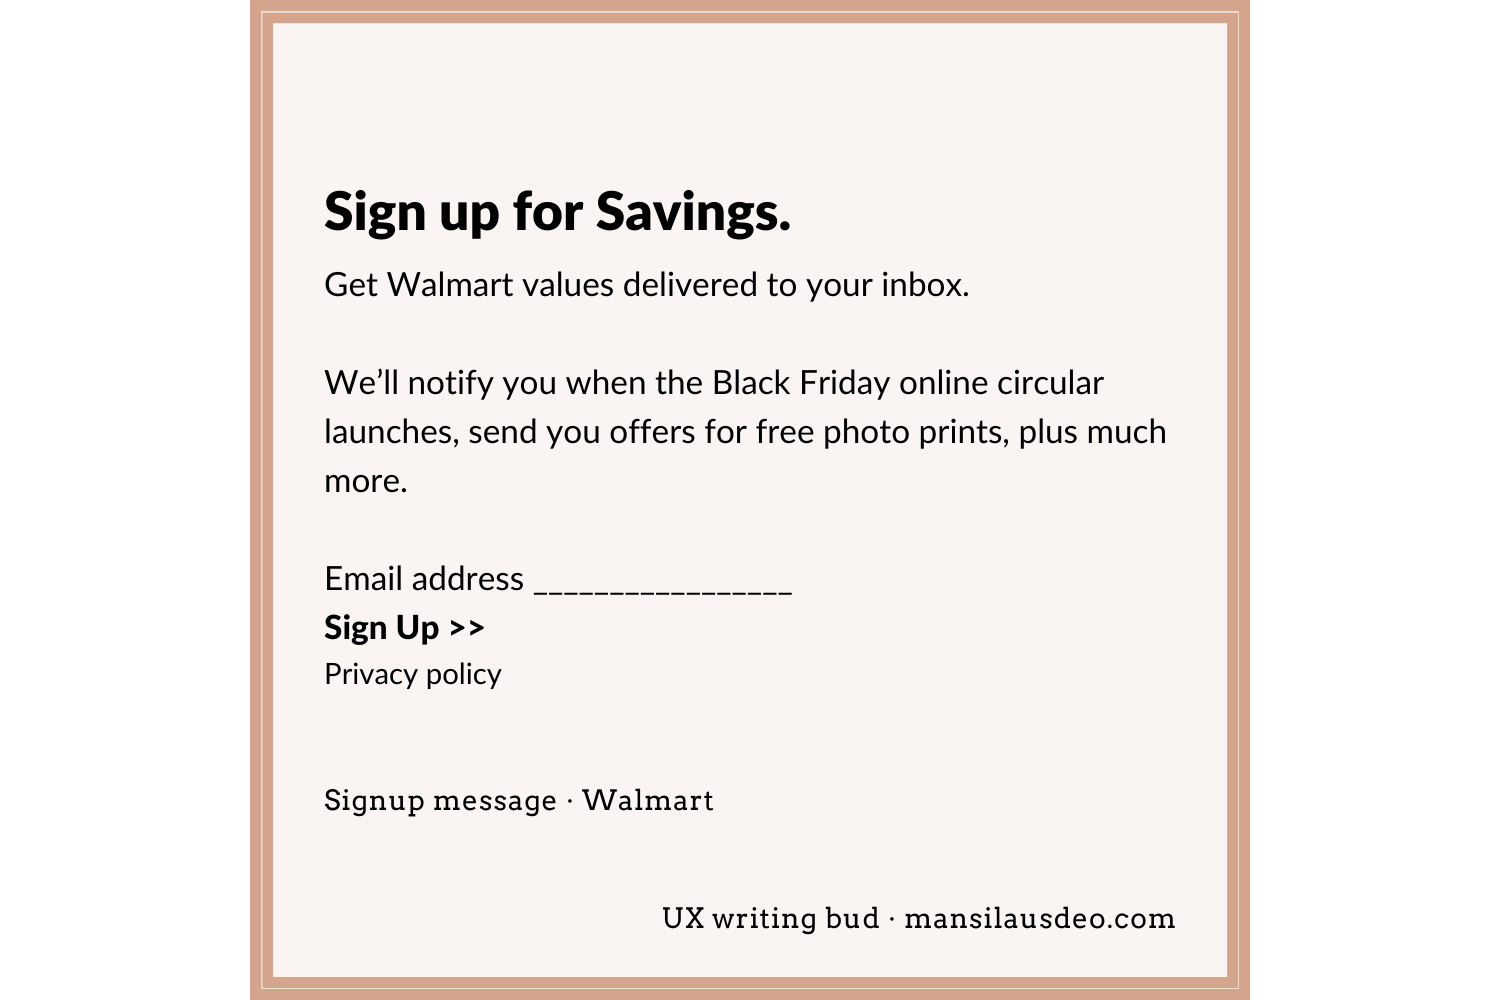 Sign up for Savings. Get Walmart values delivered to your inbox. We’ll notify you when the Black Friday online circular launches, send you offers for free photo prints, plus much more. Email address __ Sign Up >> Privacy policy Signup • Walmart